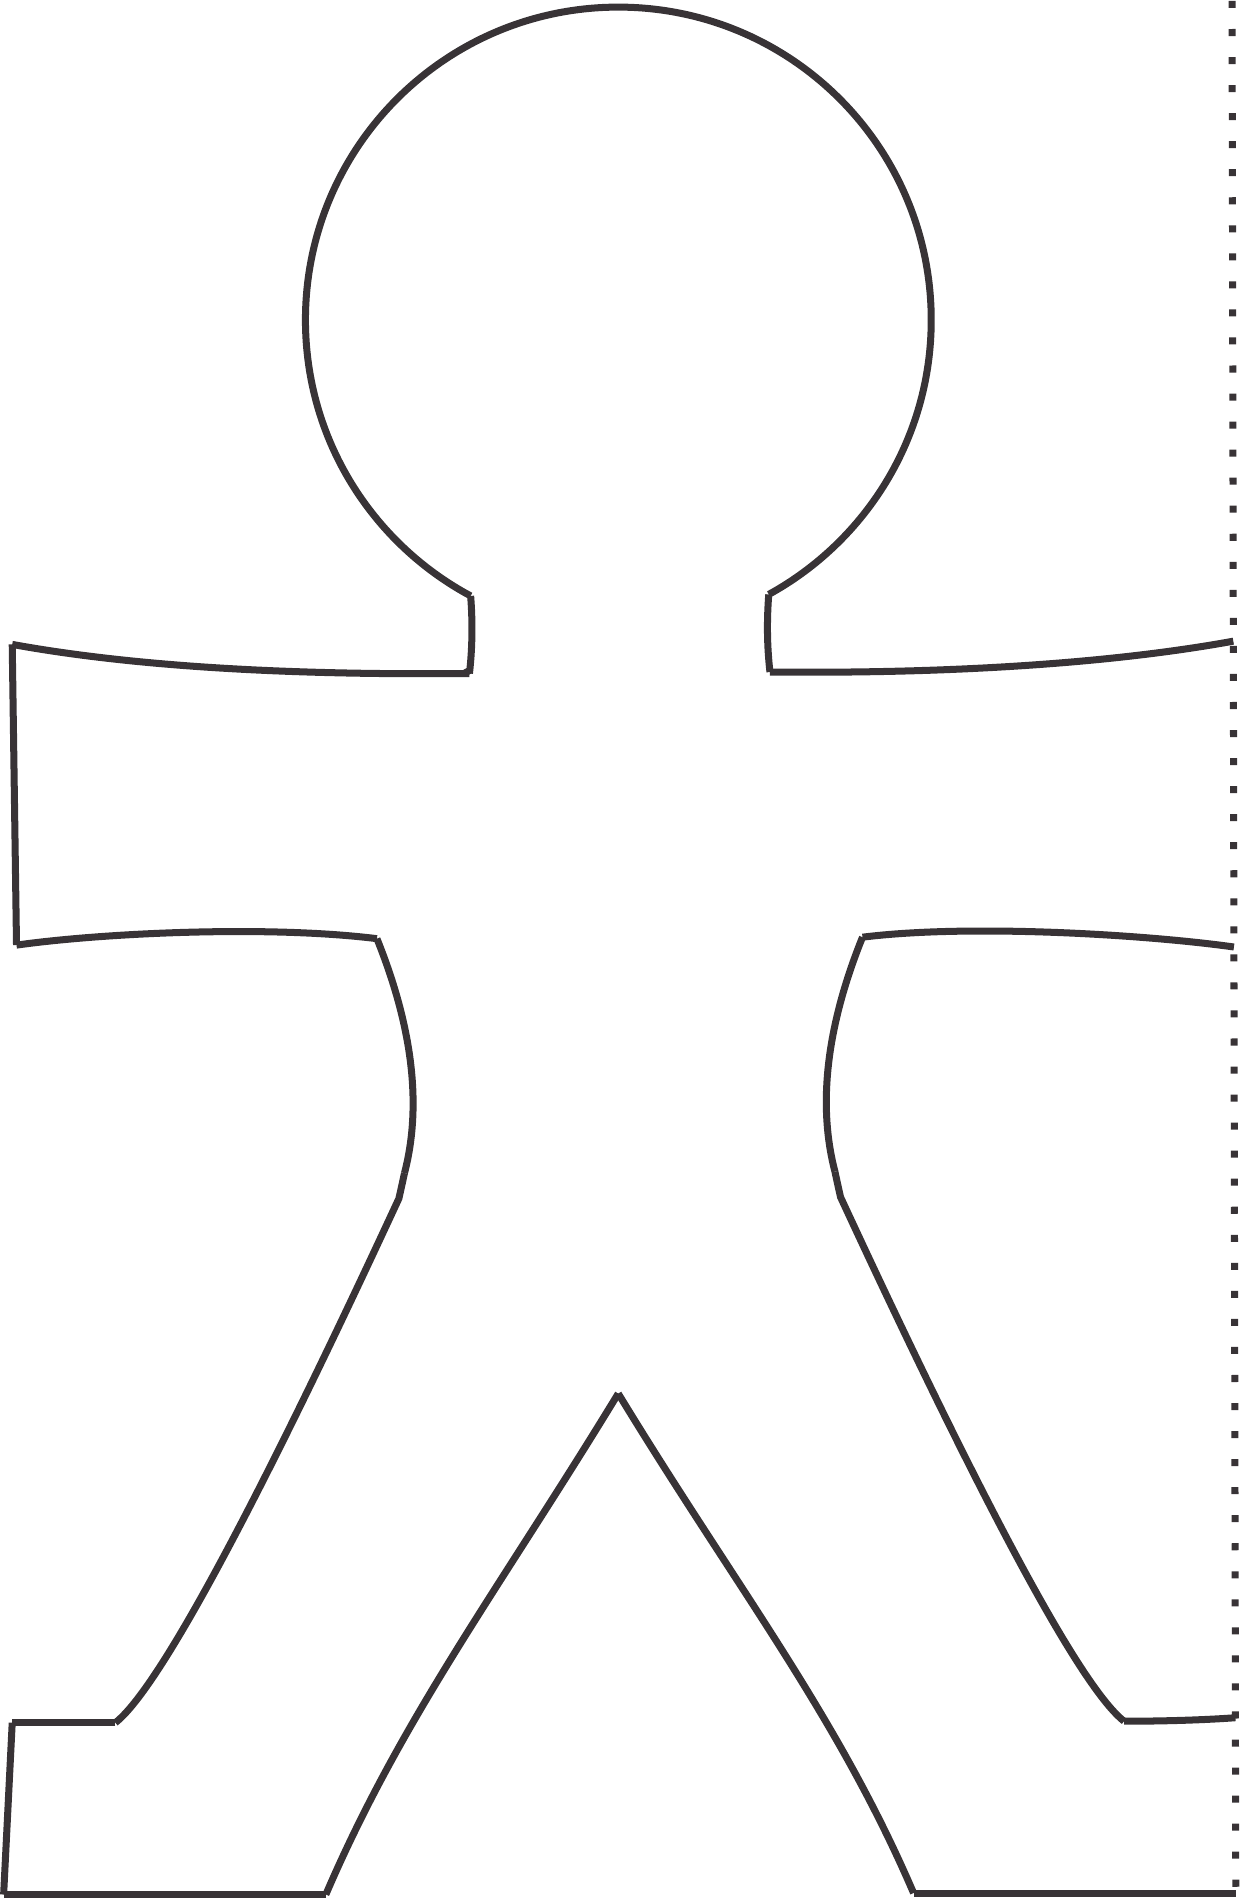 sample-paper-doll-template-free-download-freeprintable-me